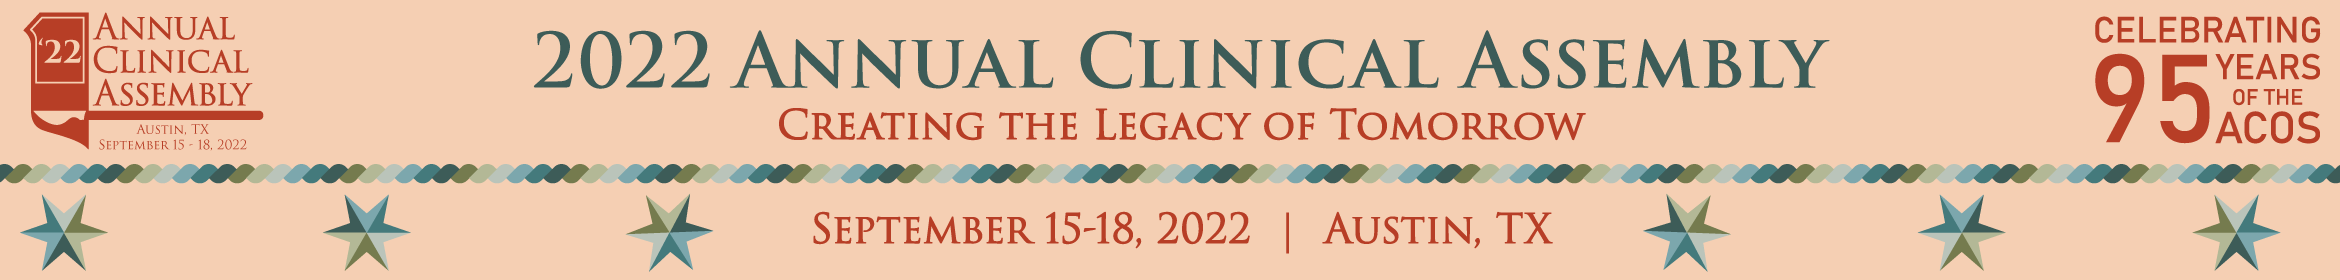 2022 Annual Clinical Assembly (ACA) Main banner